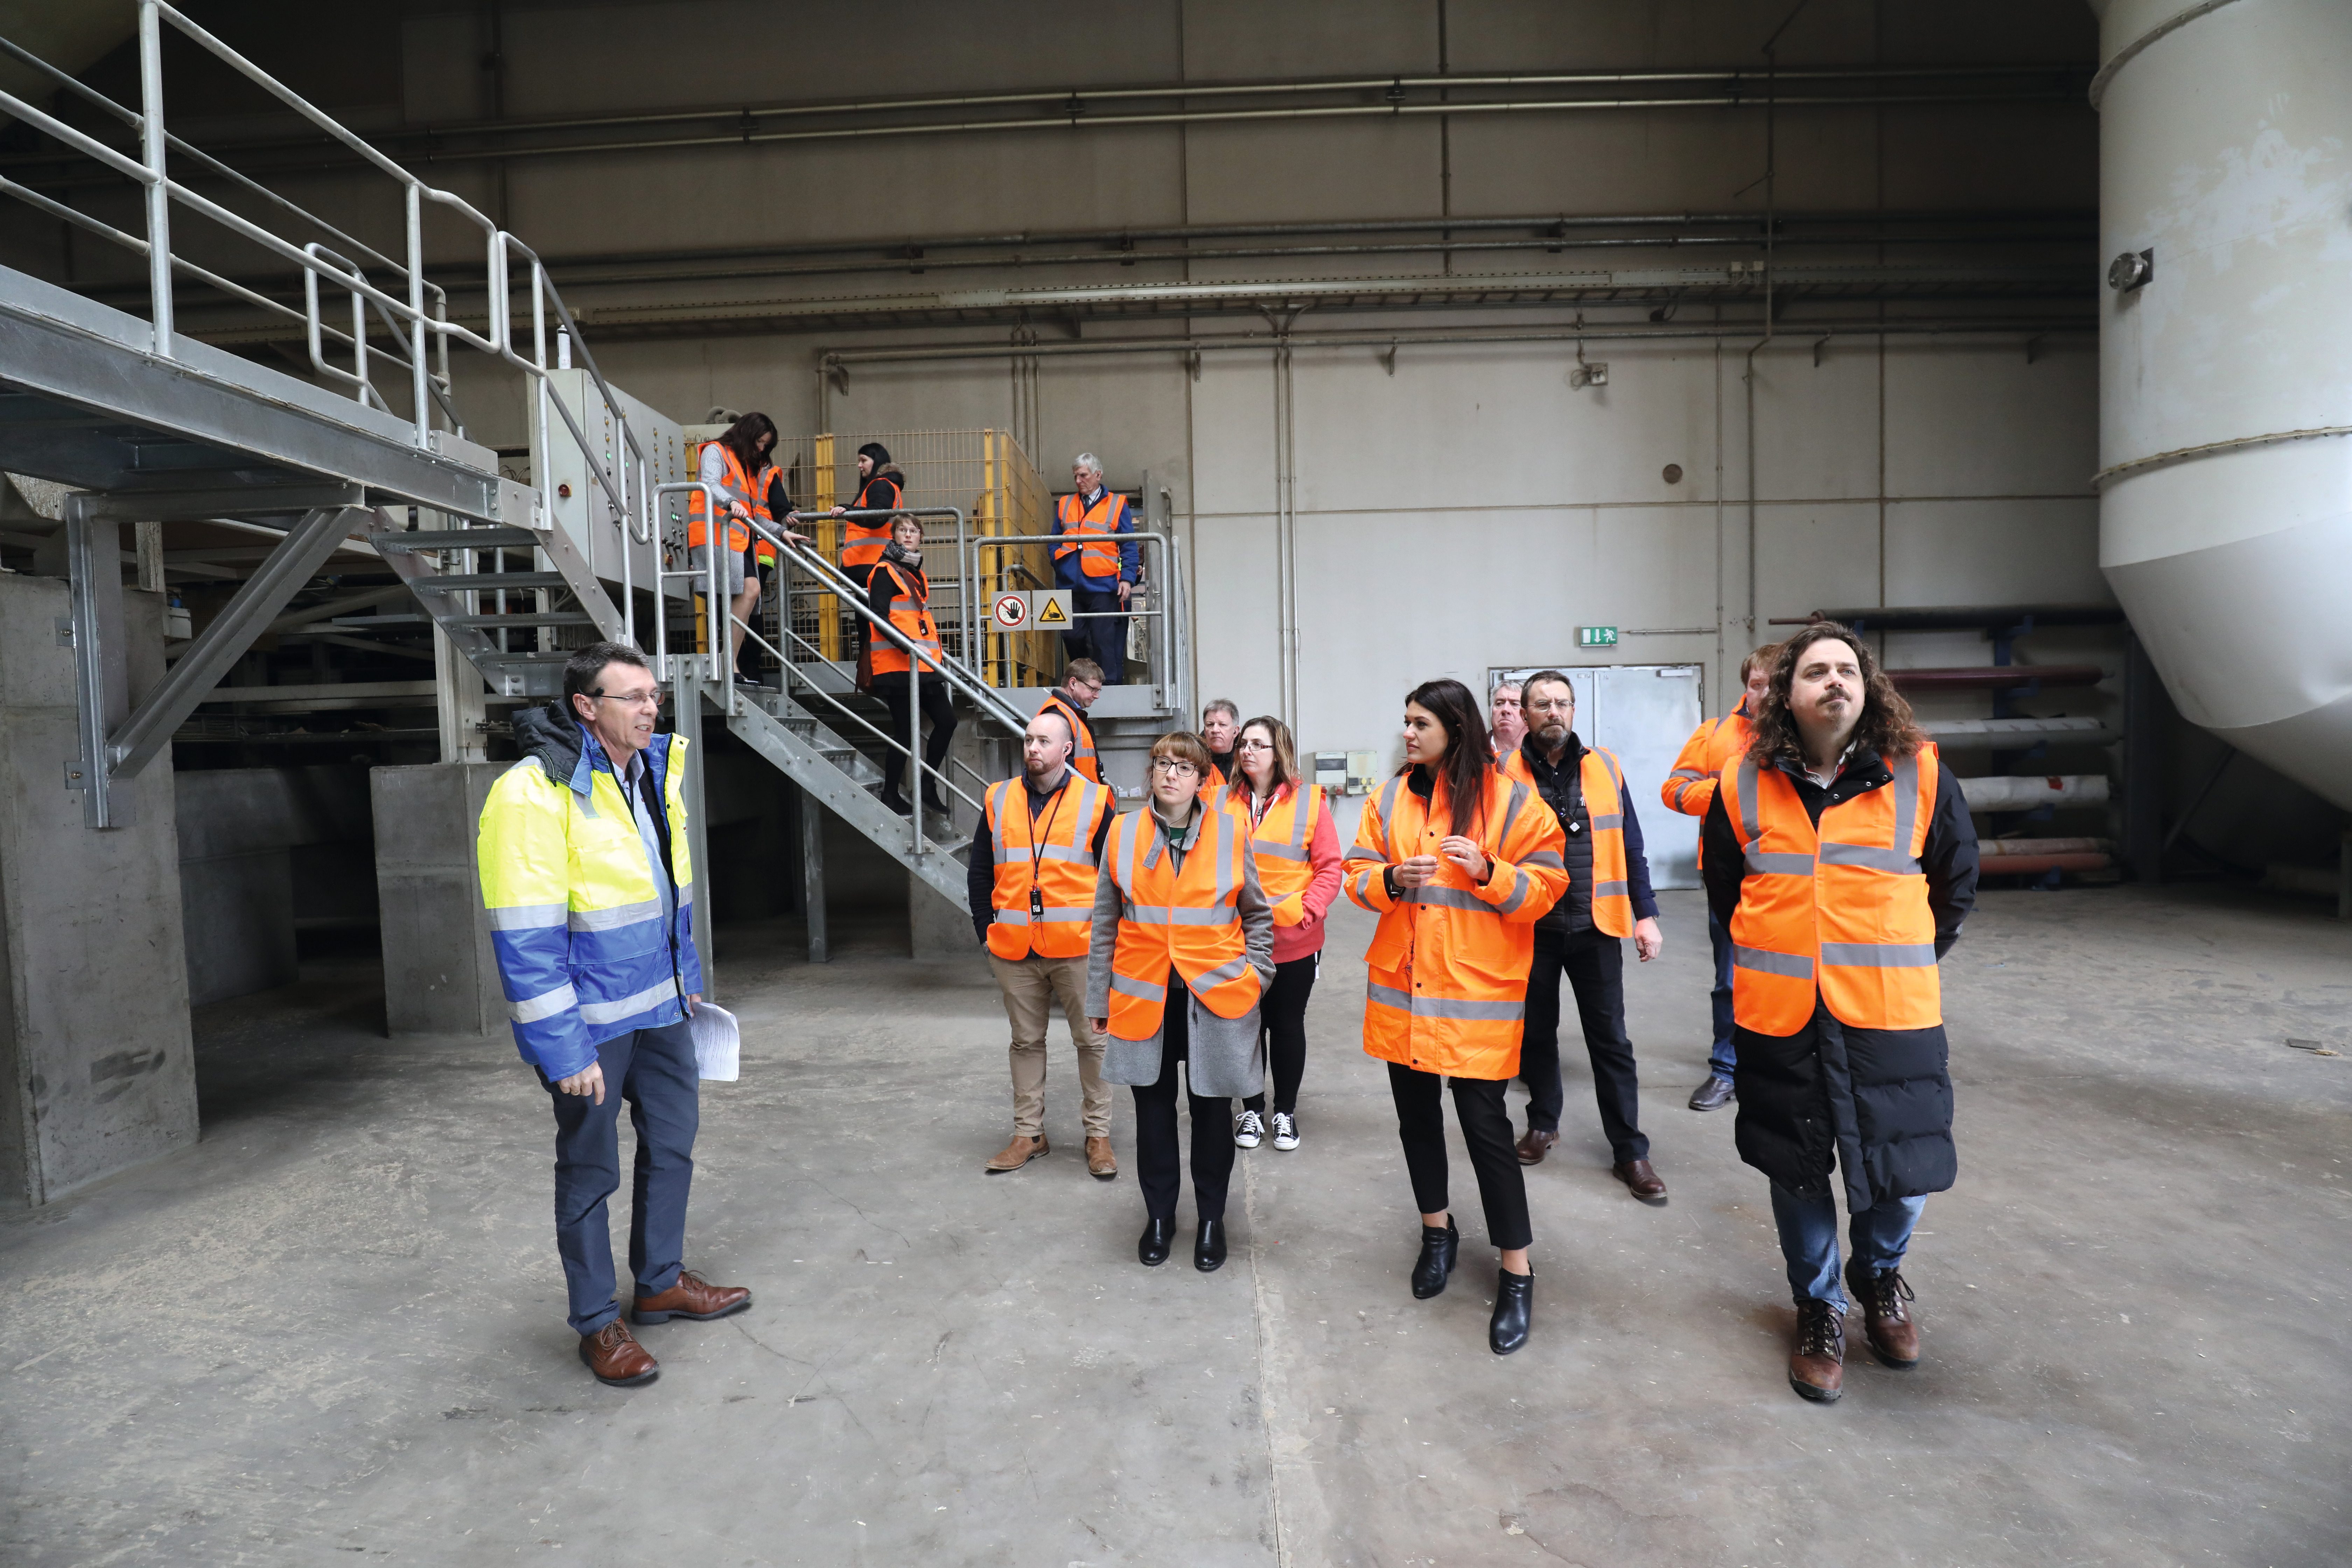 The tour allowed members to see the full production process in one of Europe’s most technologically advanced chipboard factories.